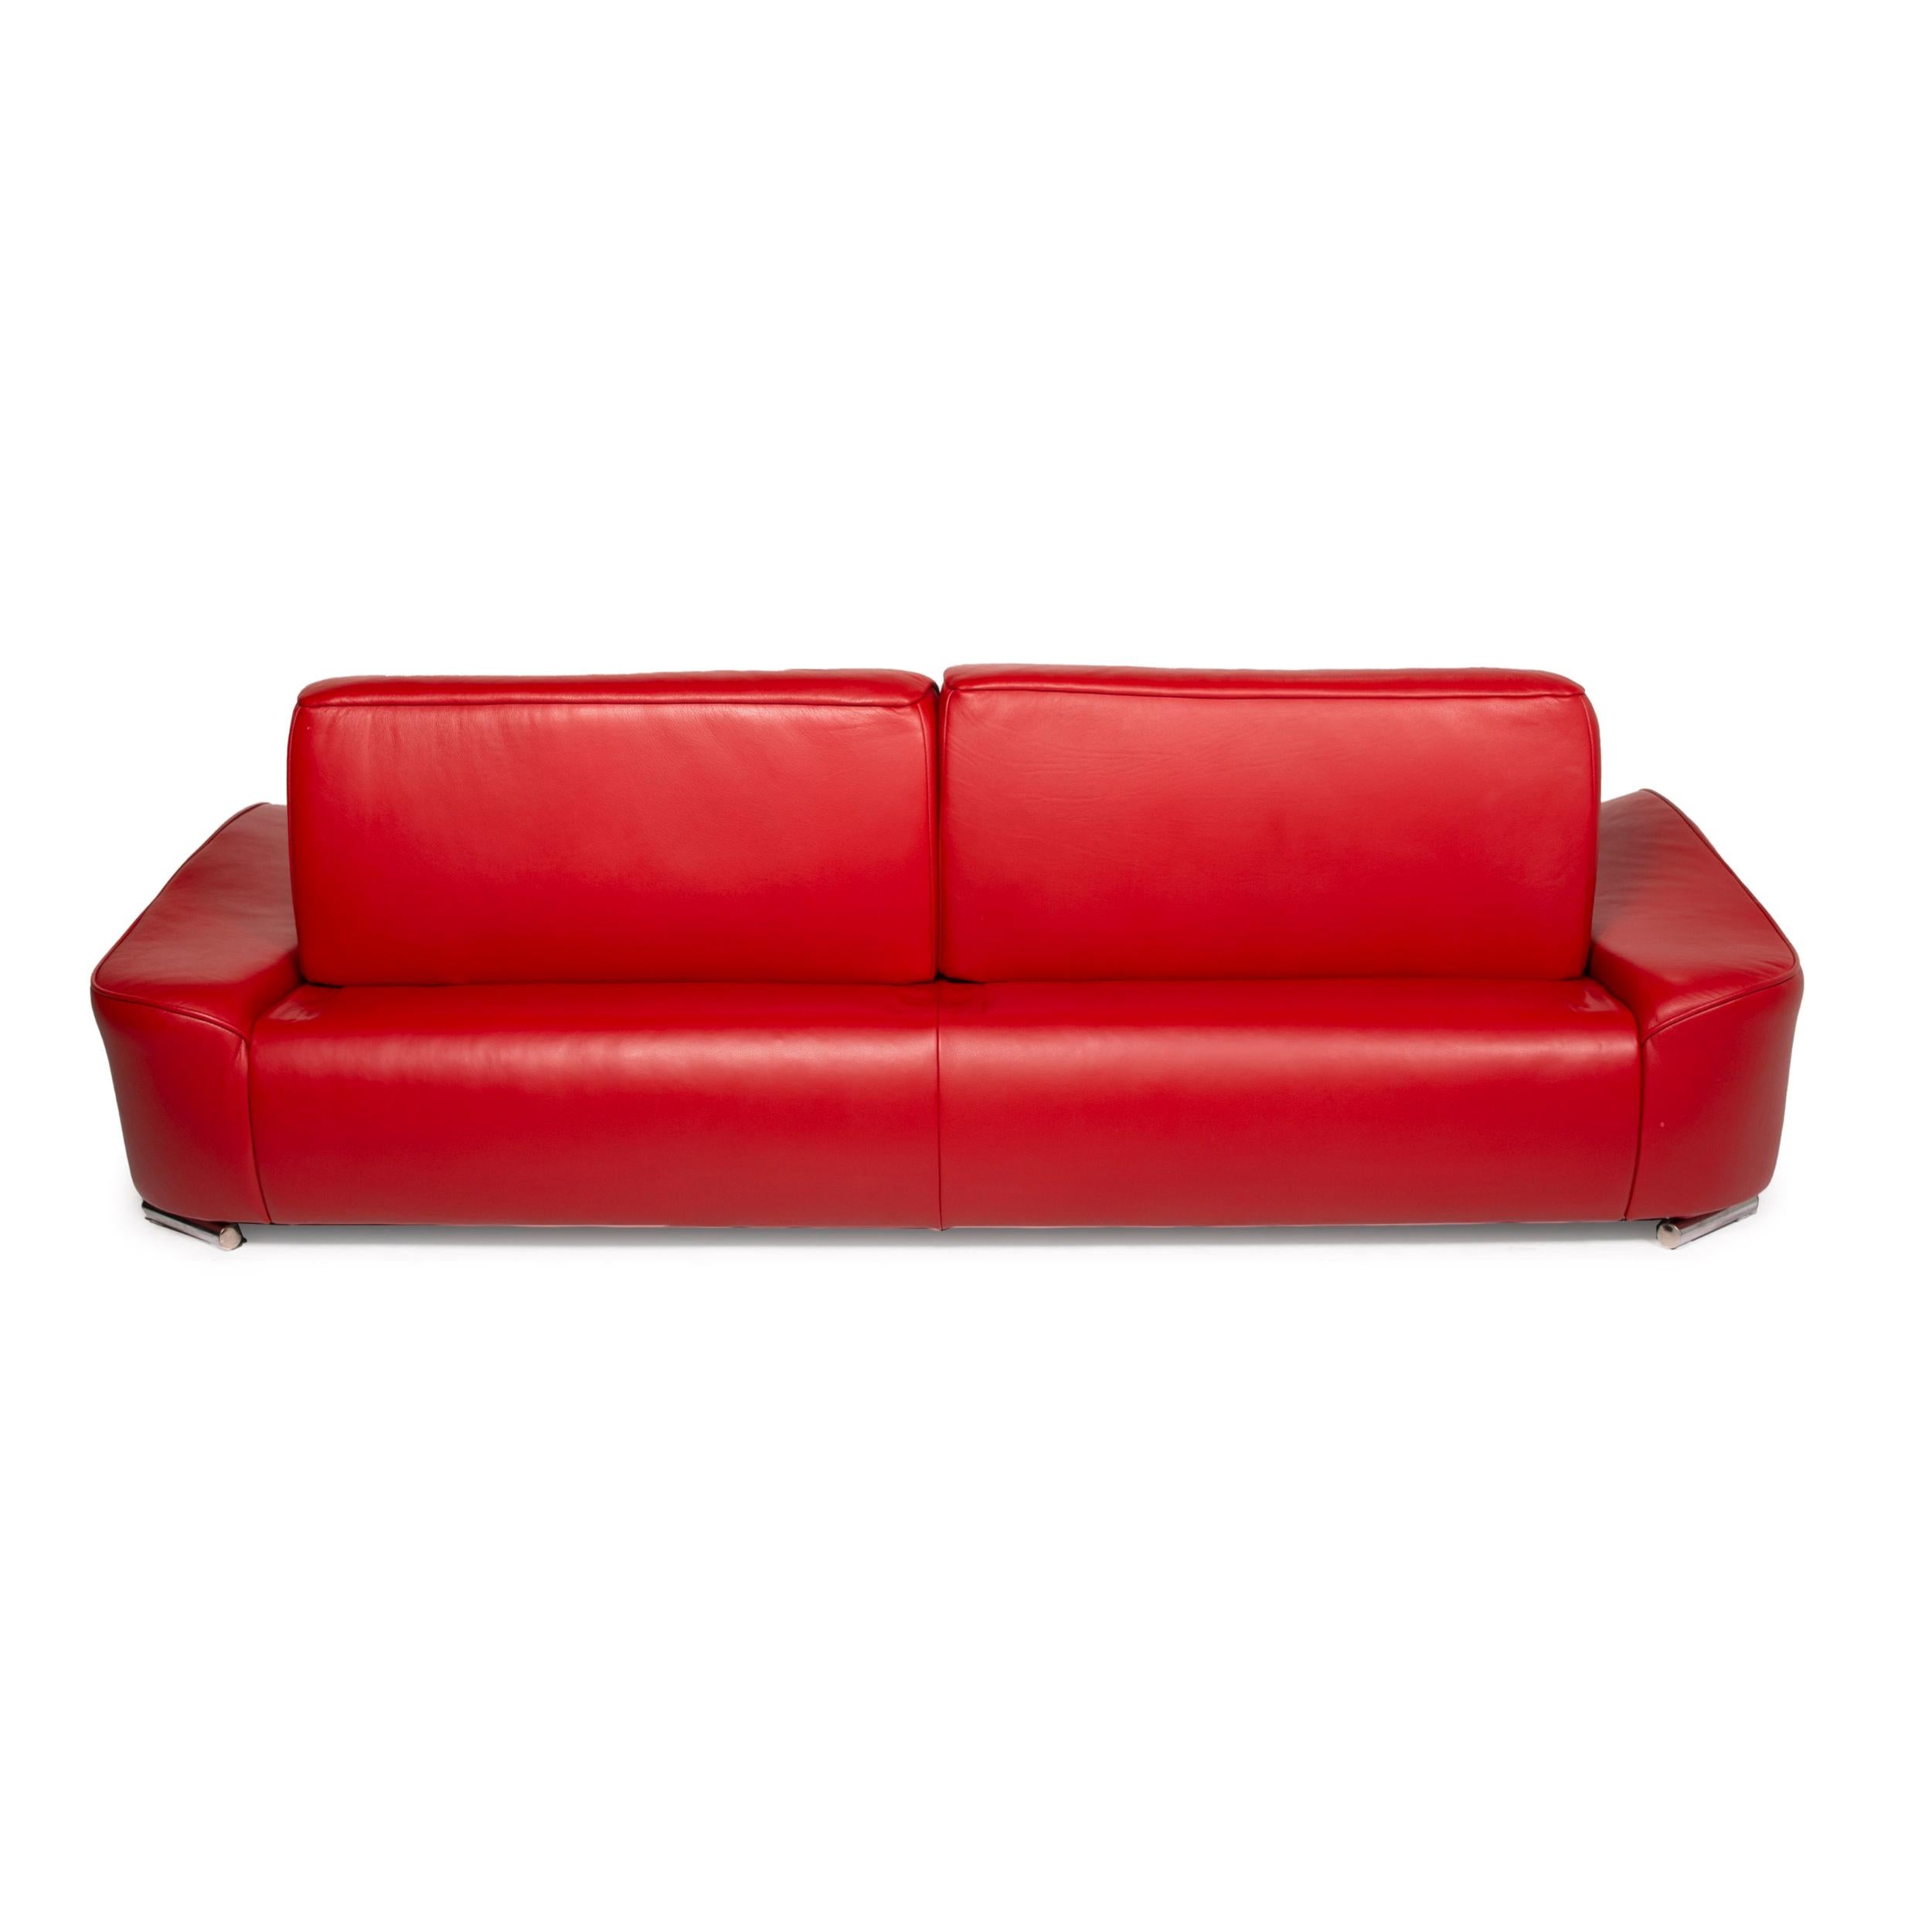 Musterring Mr-740 Leather Sofa Red Three-Seater Function 8